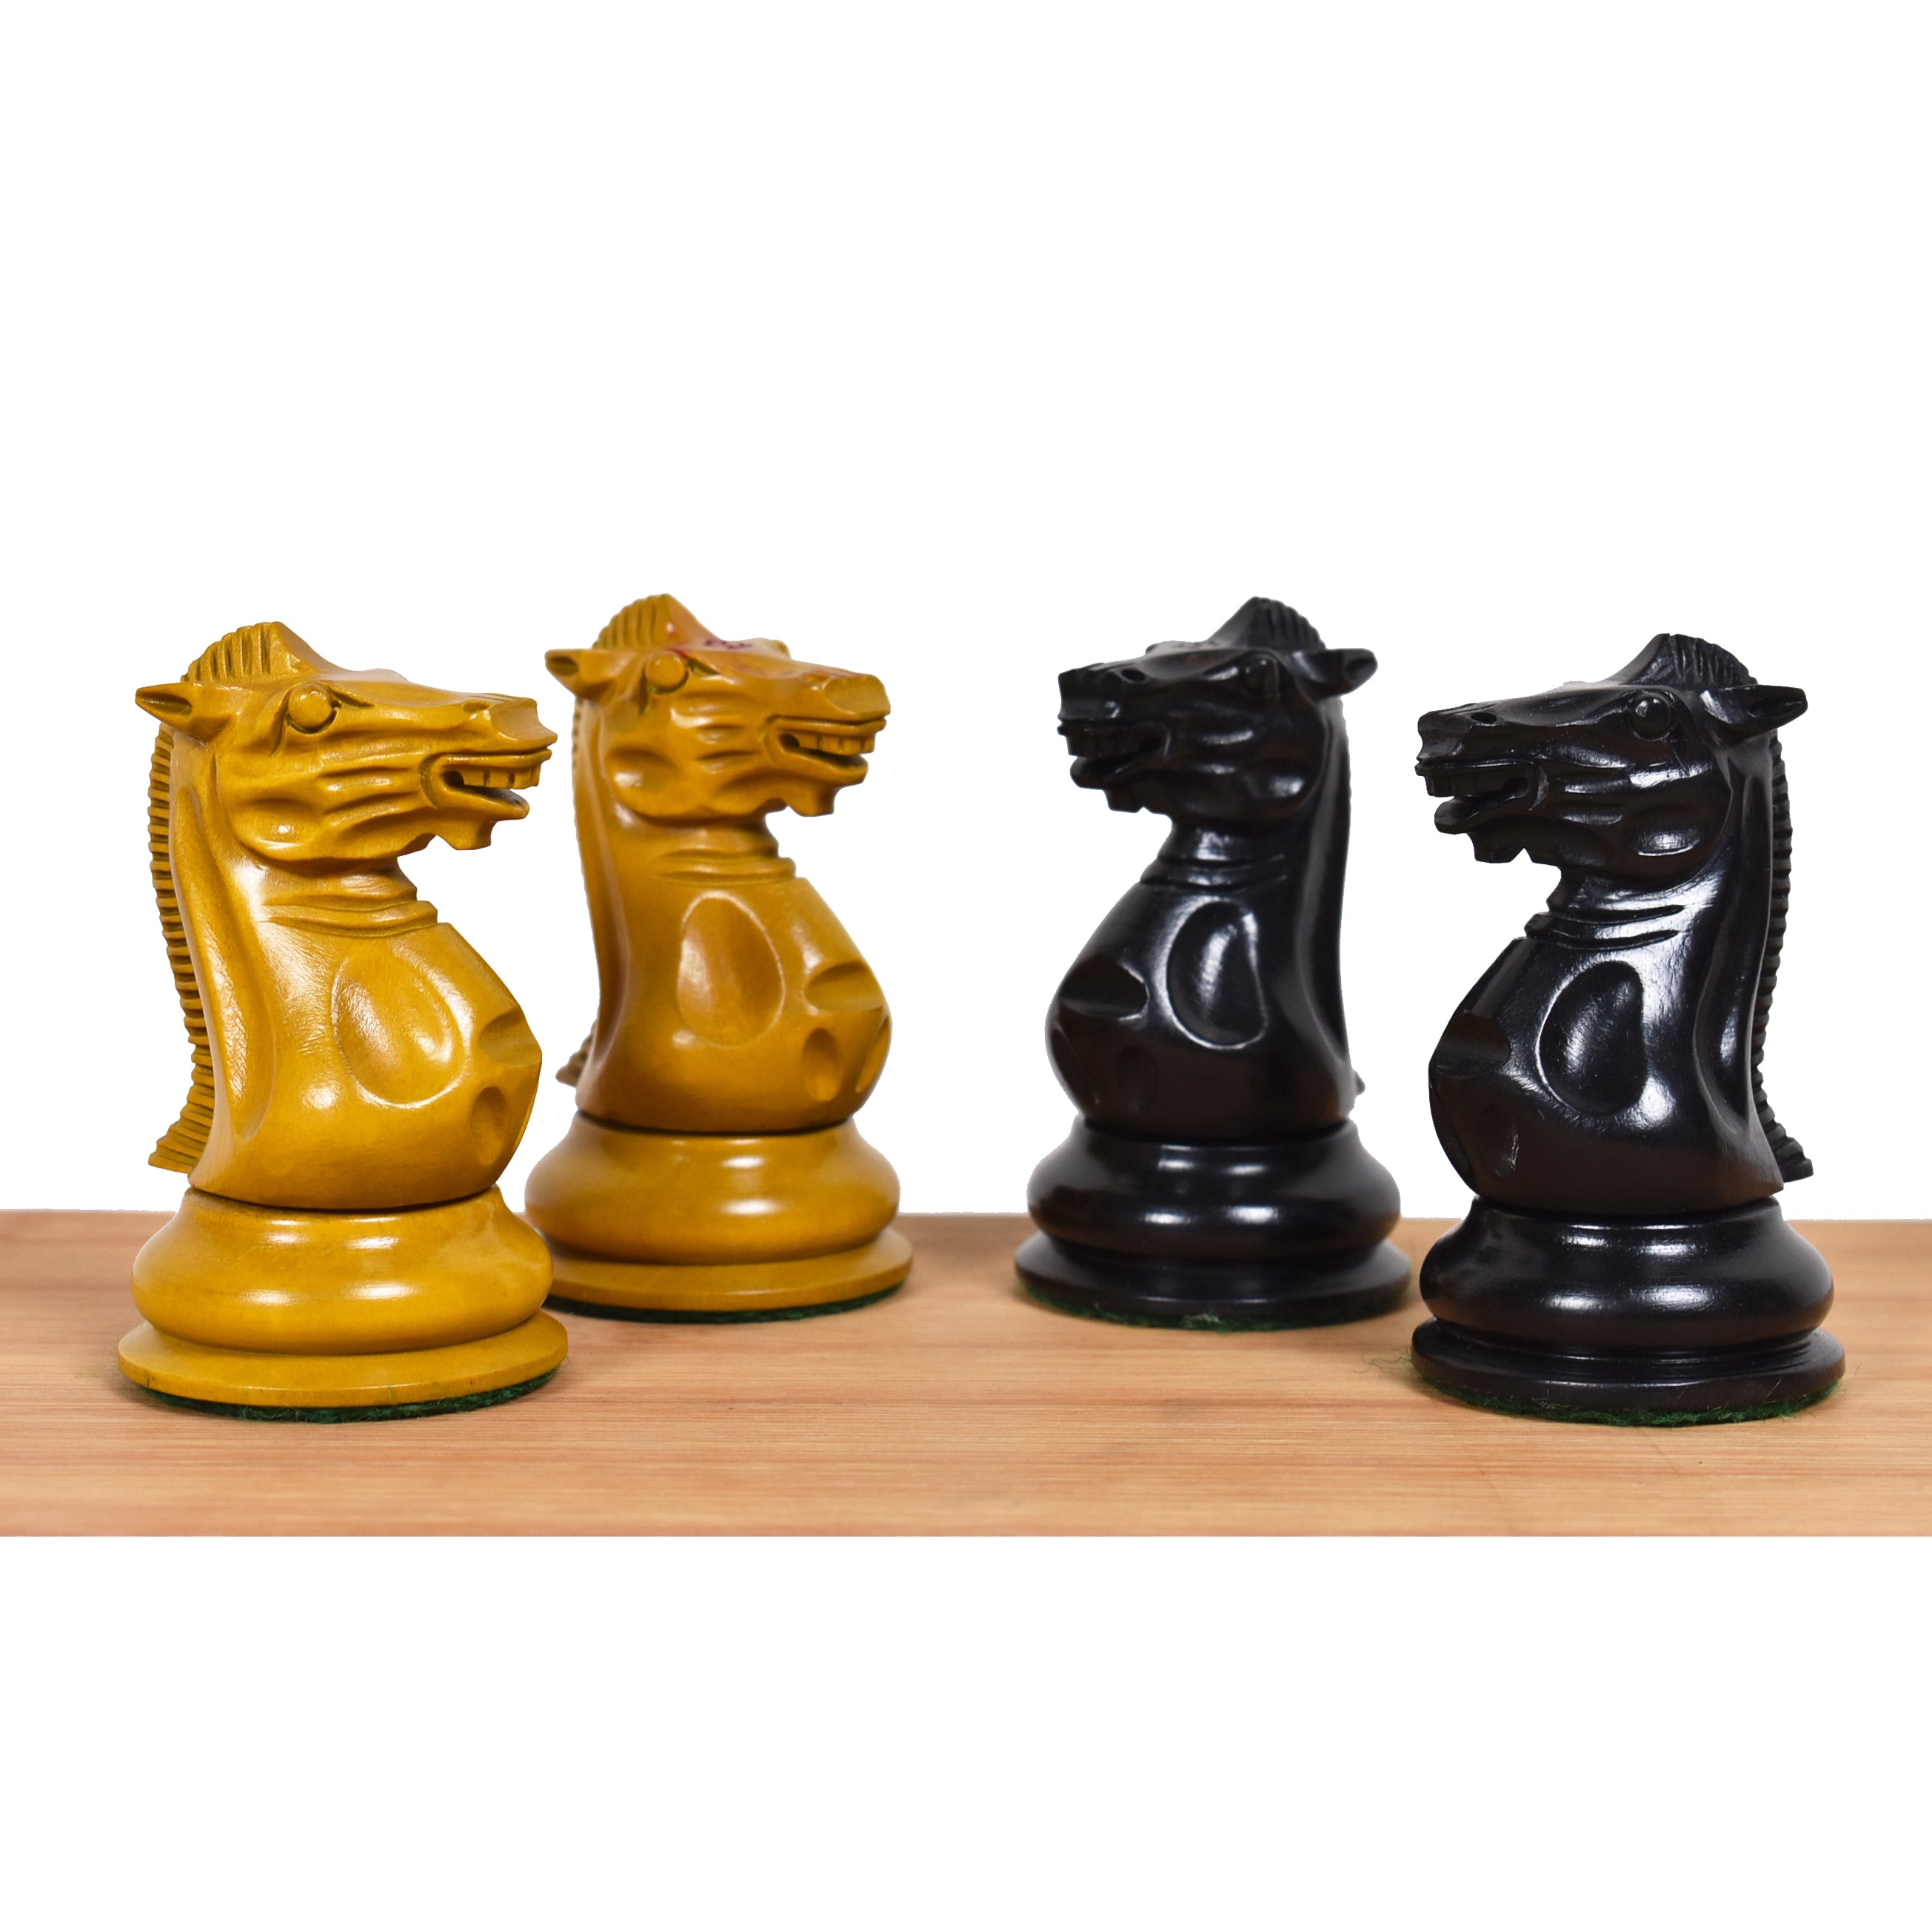 The Conventional Chess Sets from 1700 to the introduction of Staunton's  (1849)